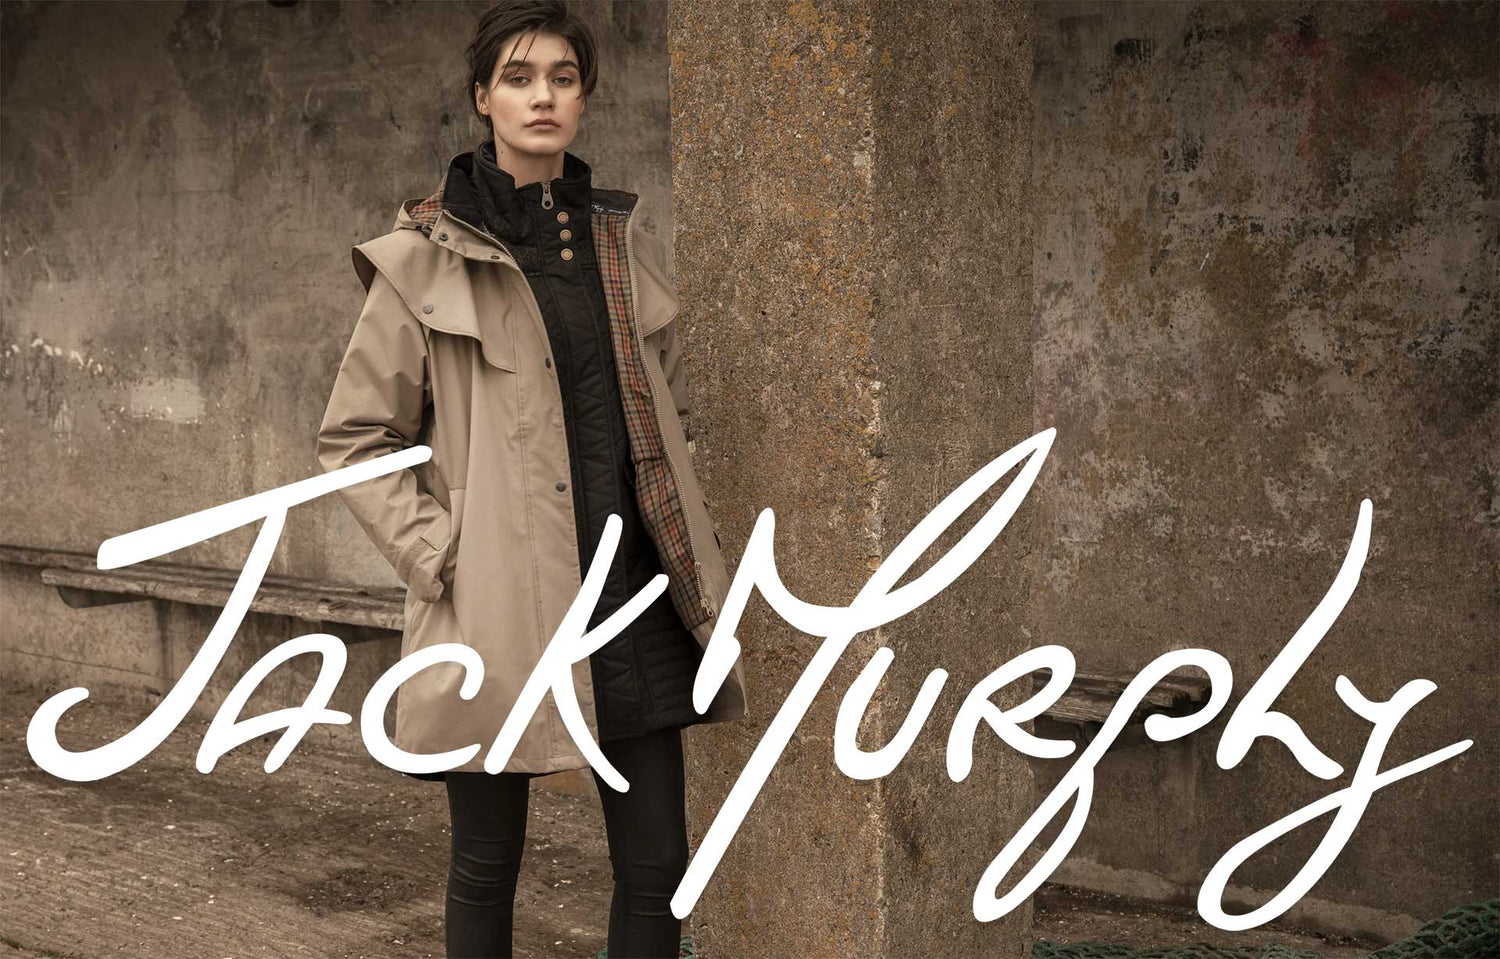 Jack Murphy signature logo in white with woman in beige waterproof coat. Stone wall background.